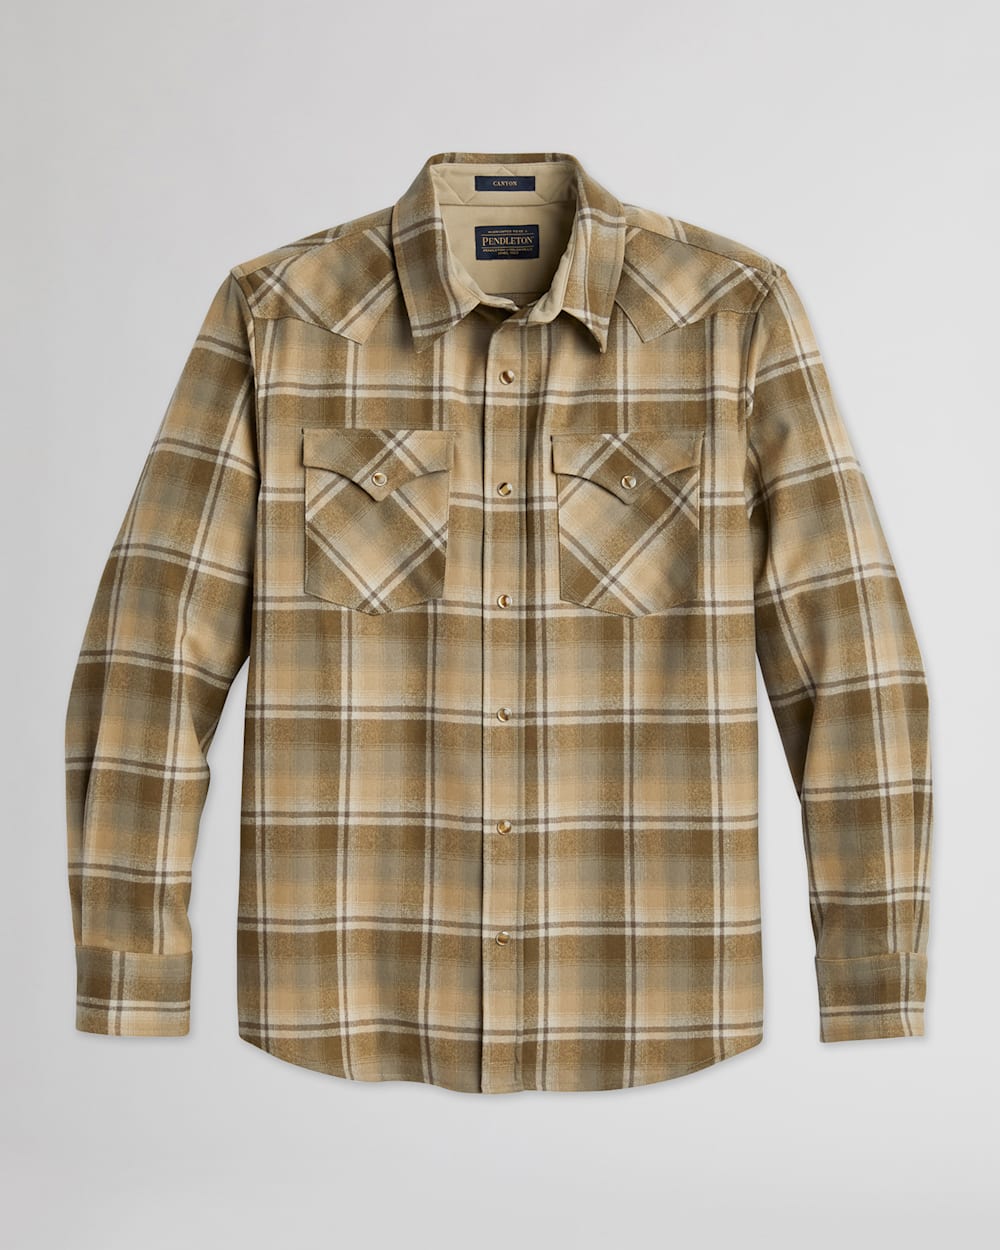 MEN'S PLAID SNAP-FRONT WESTERN CANYON SHIRT IN OLIVE/TAN PLAID image number 1